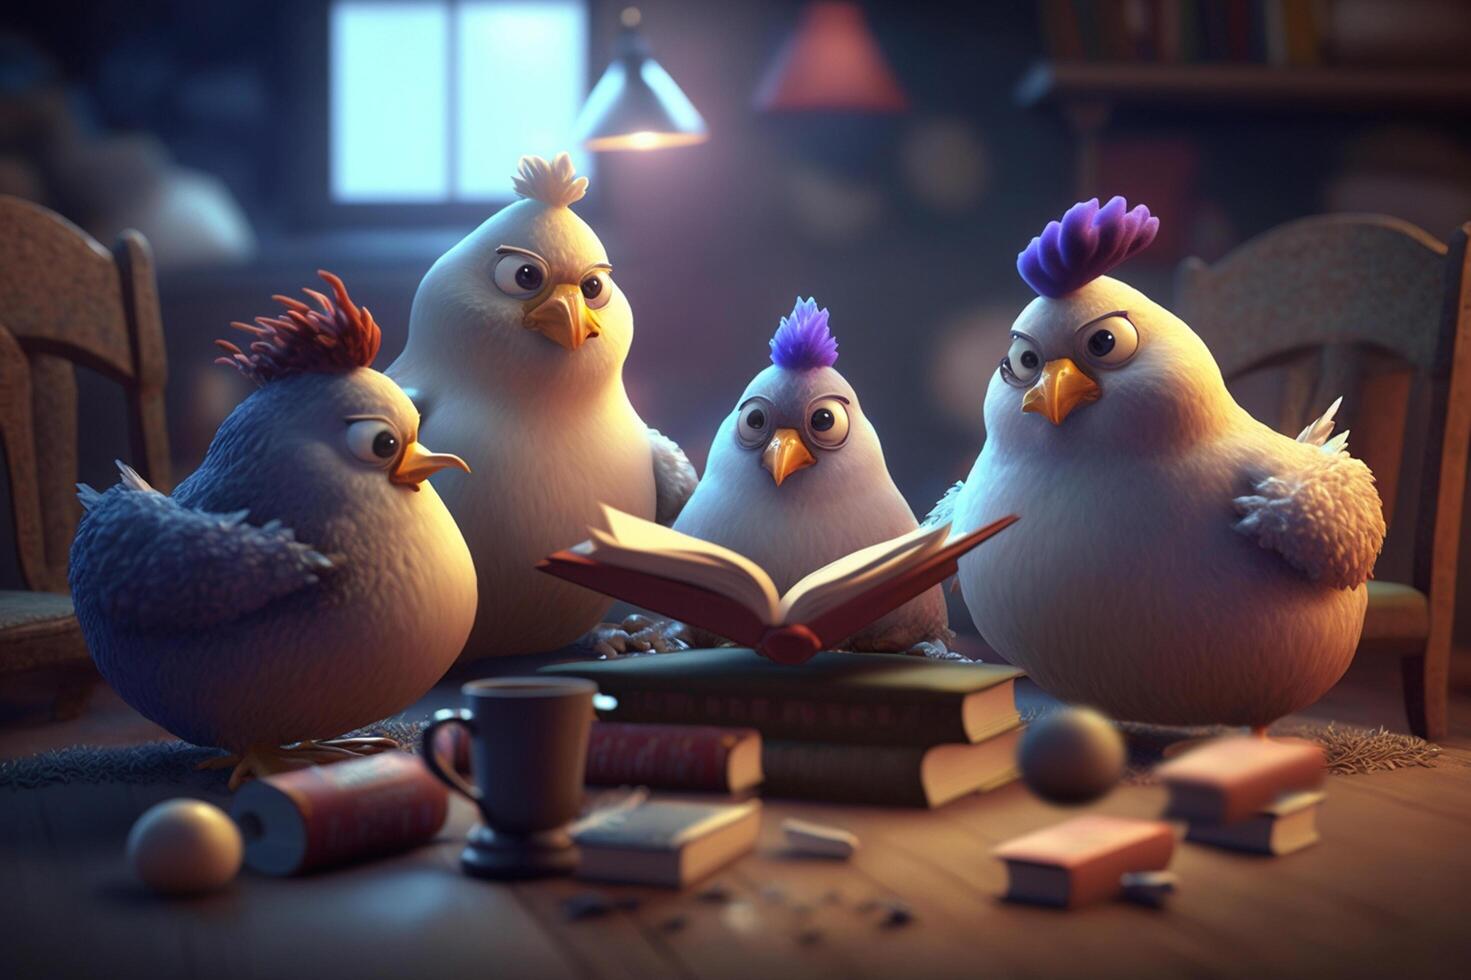 Curious Chickens Reading a Book with Surprise photo